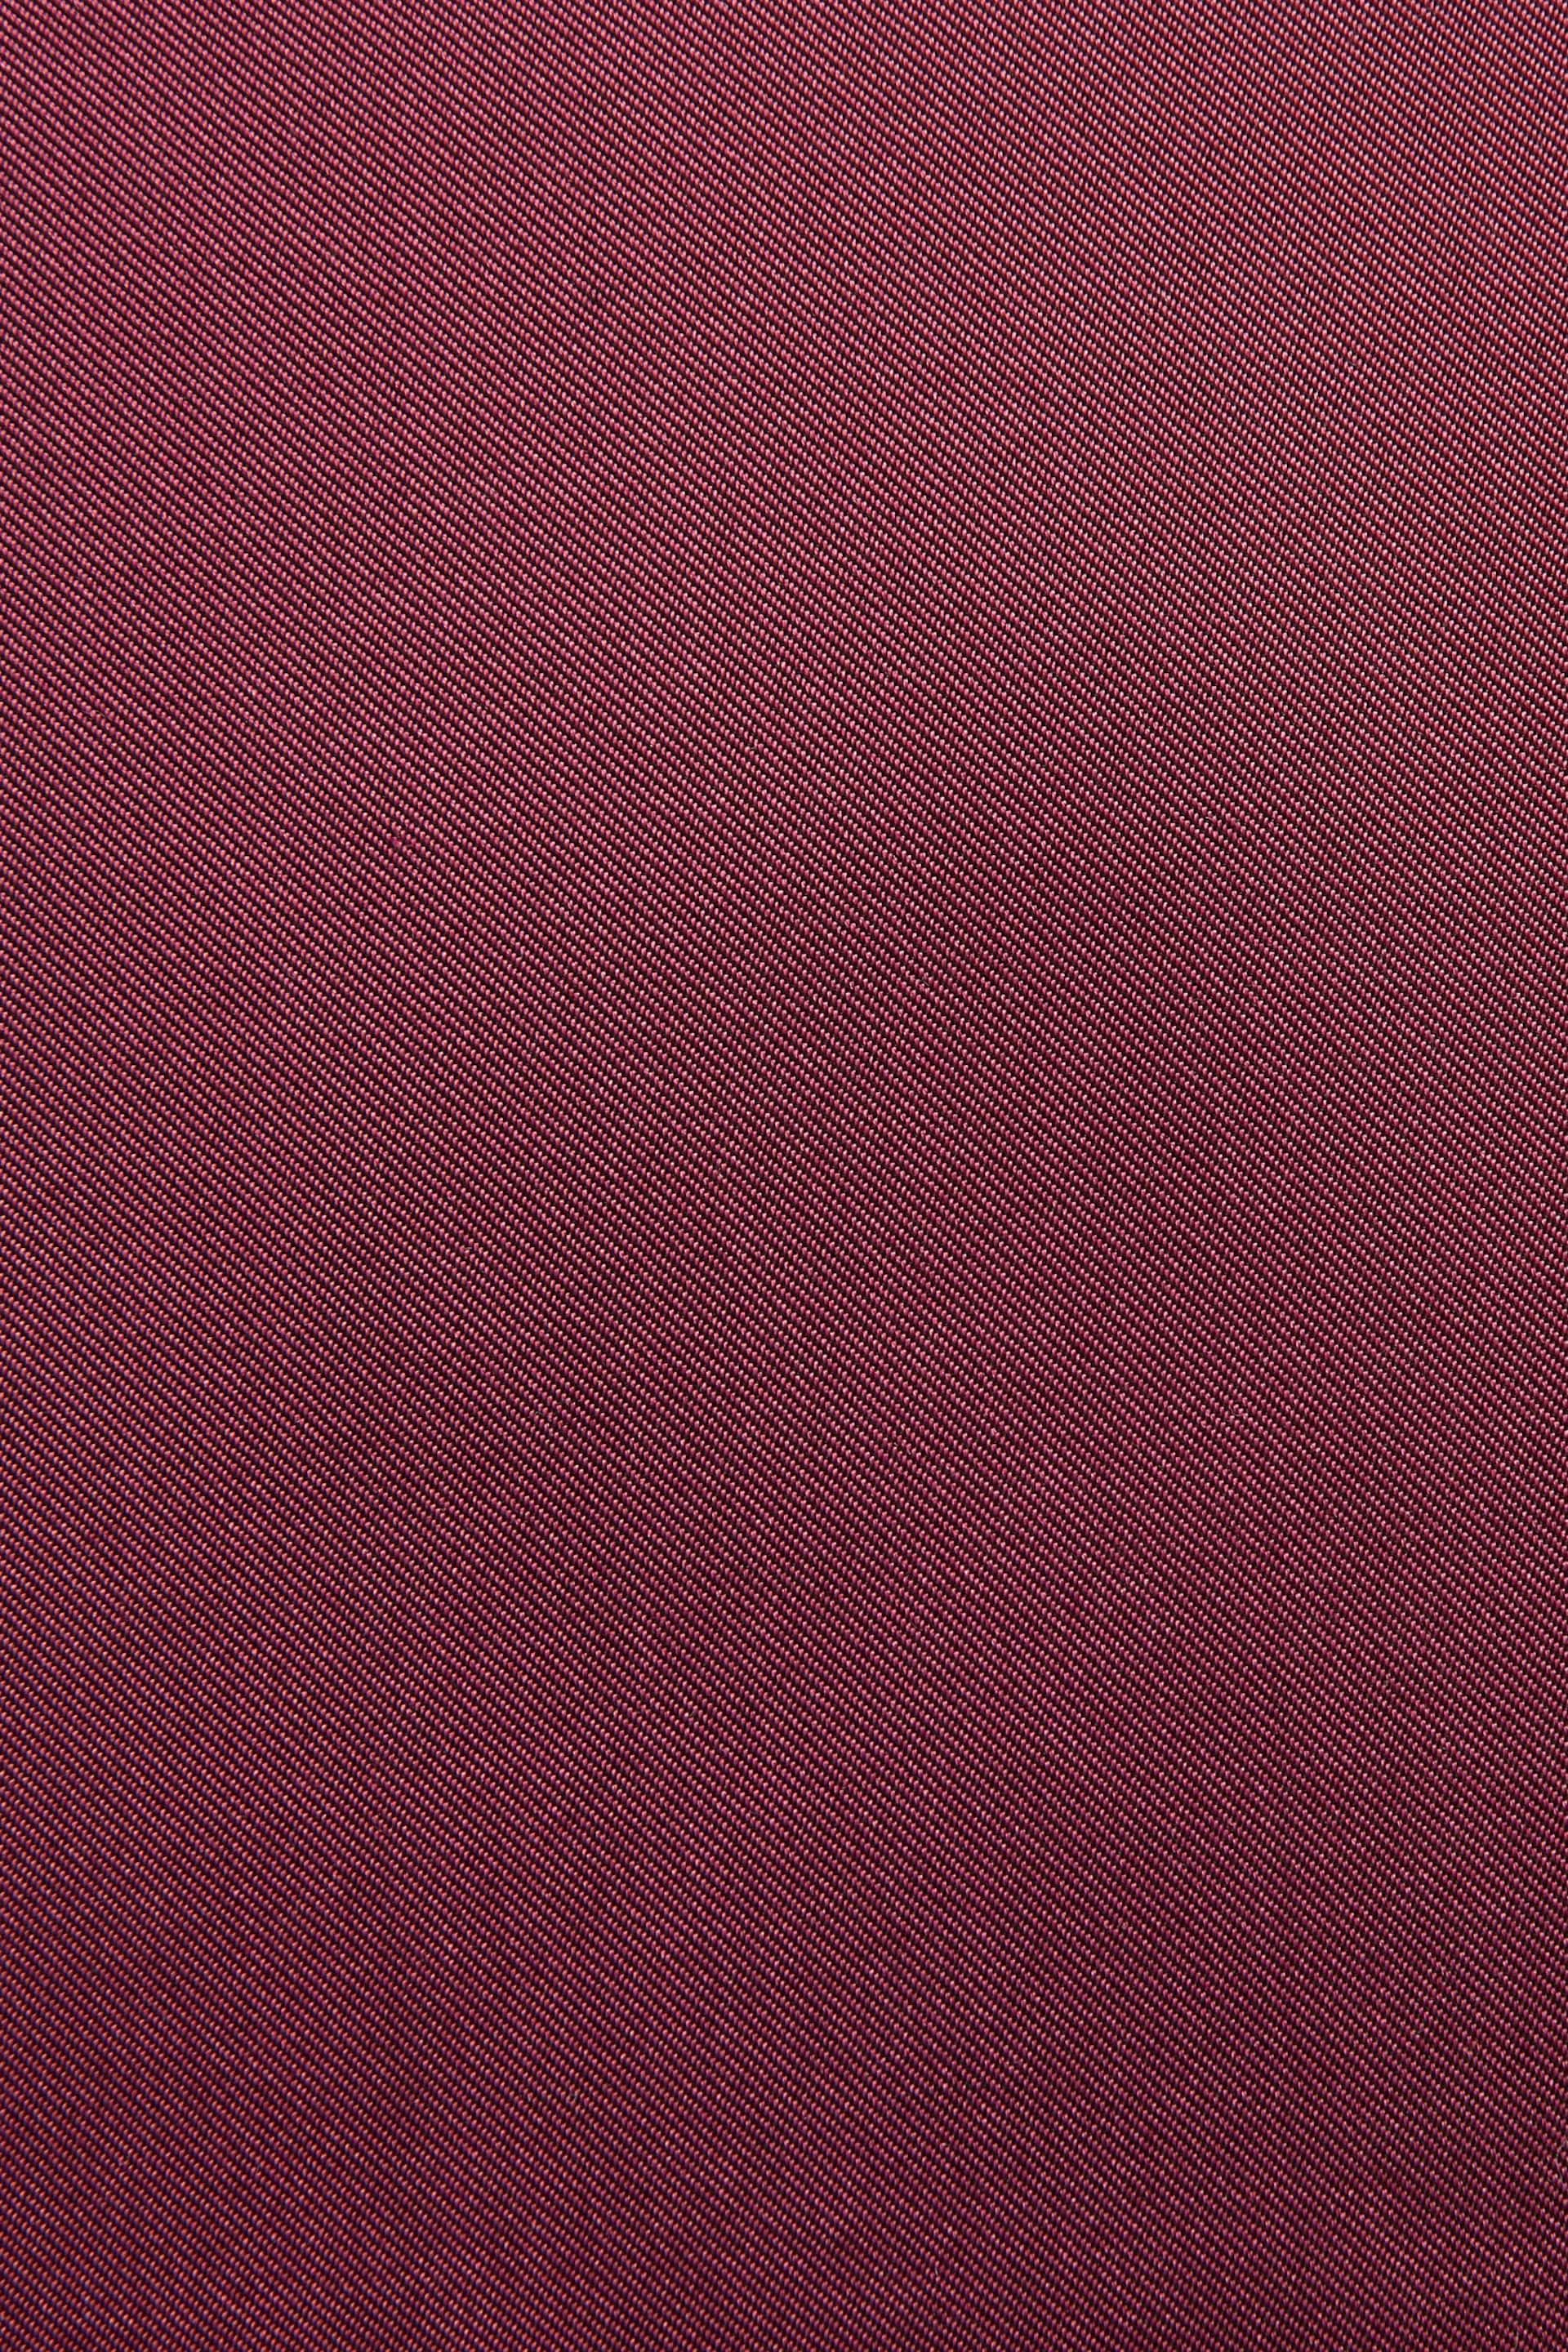 Burgundy Red Silk Tie And Pocket Square Set - Image 5 of 5